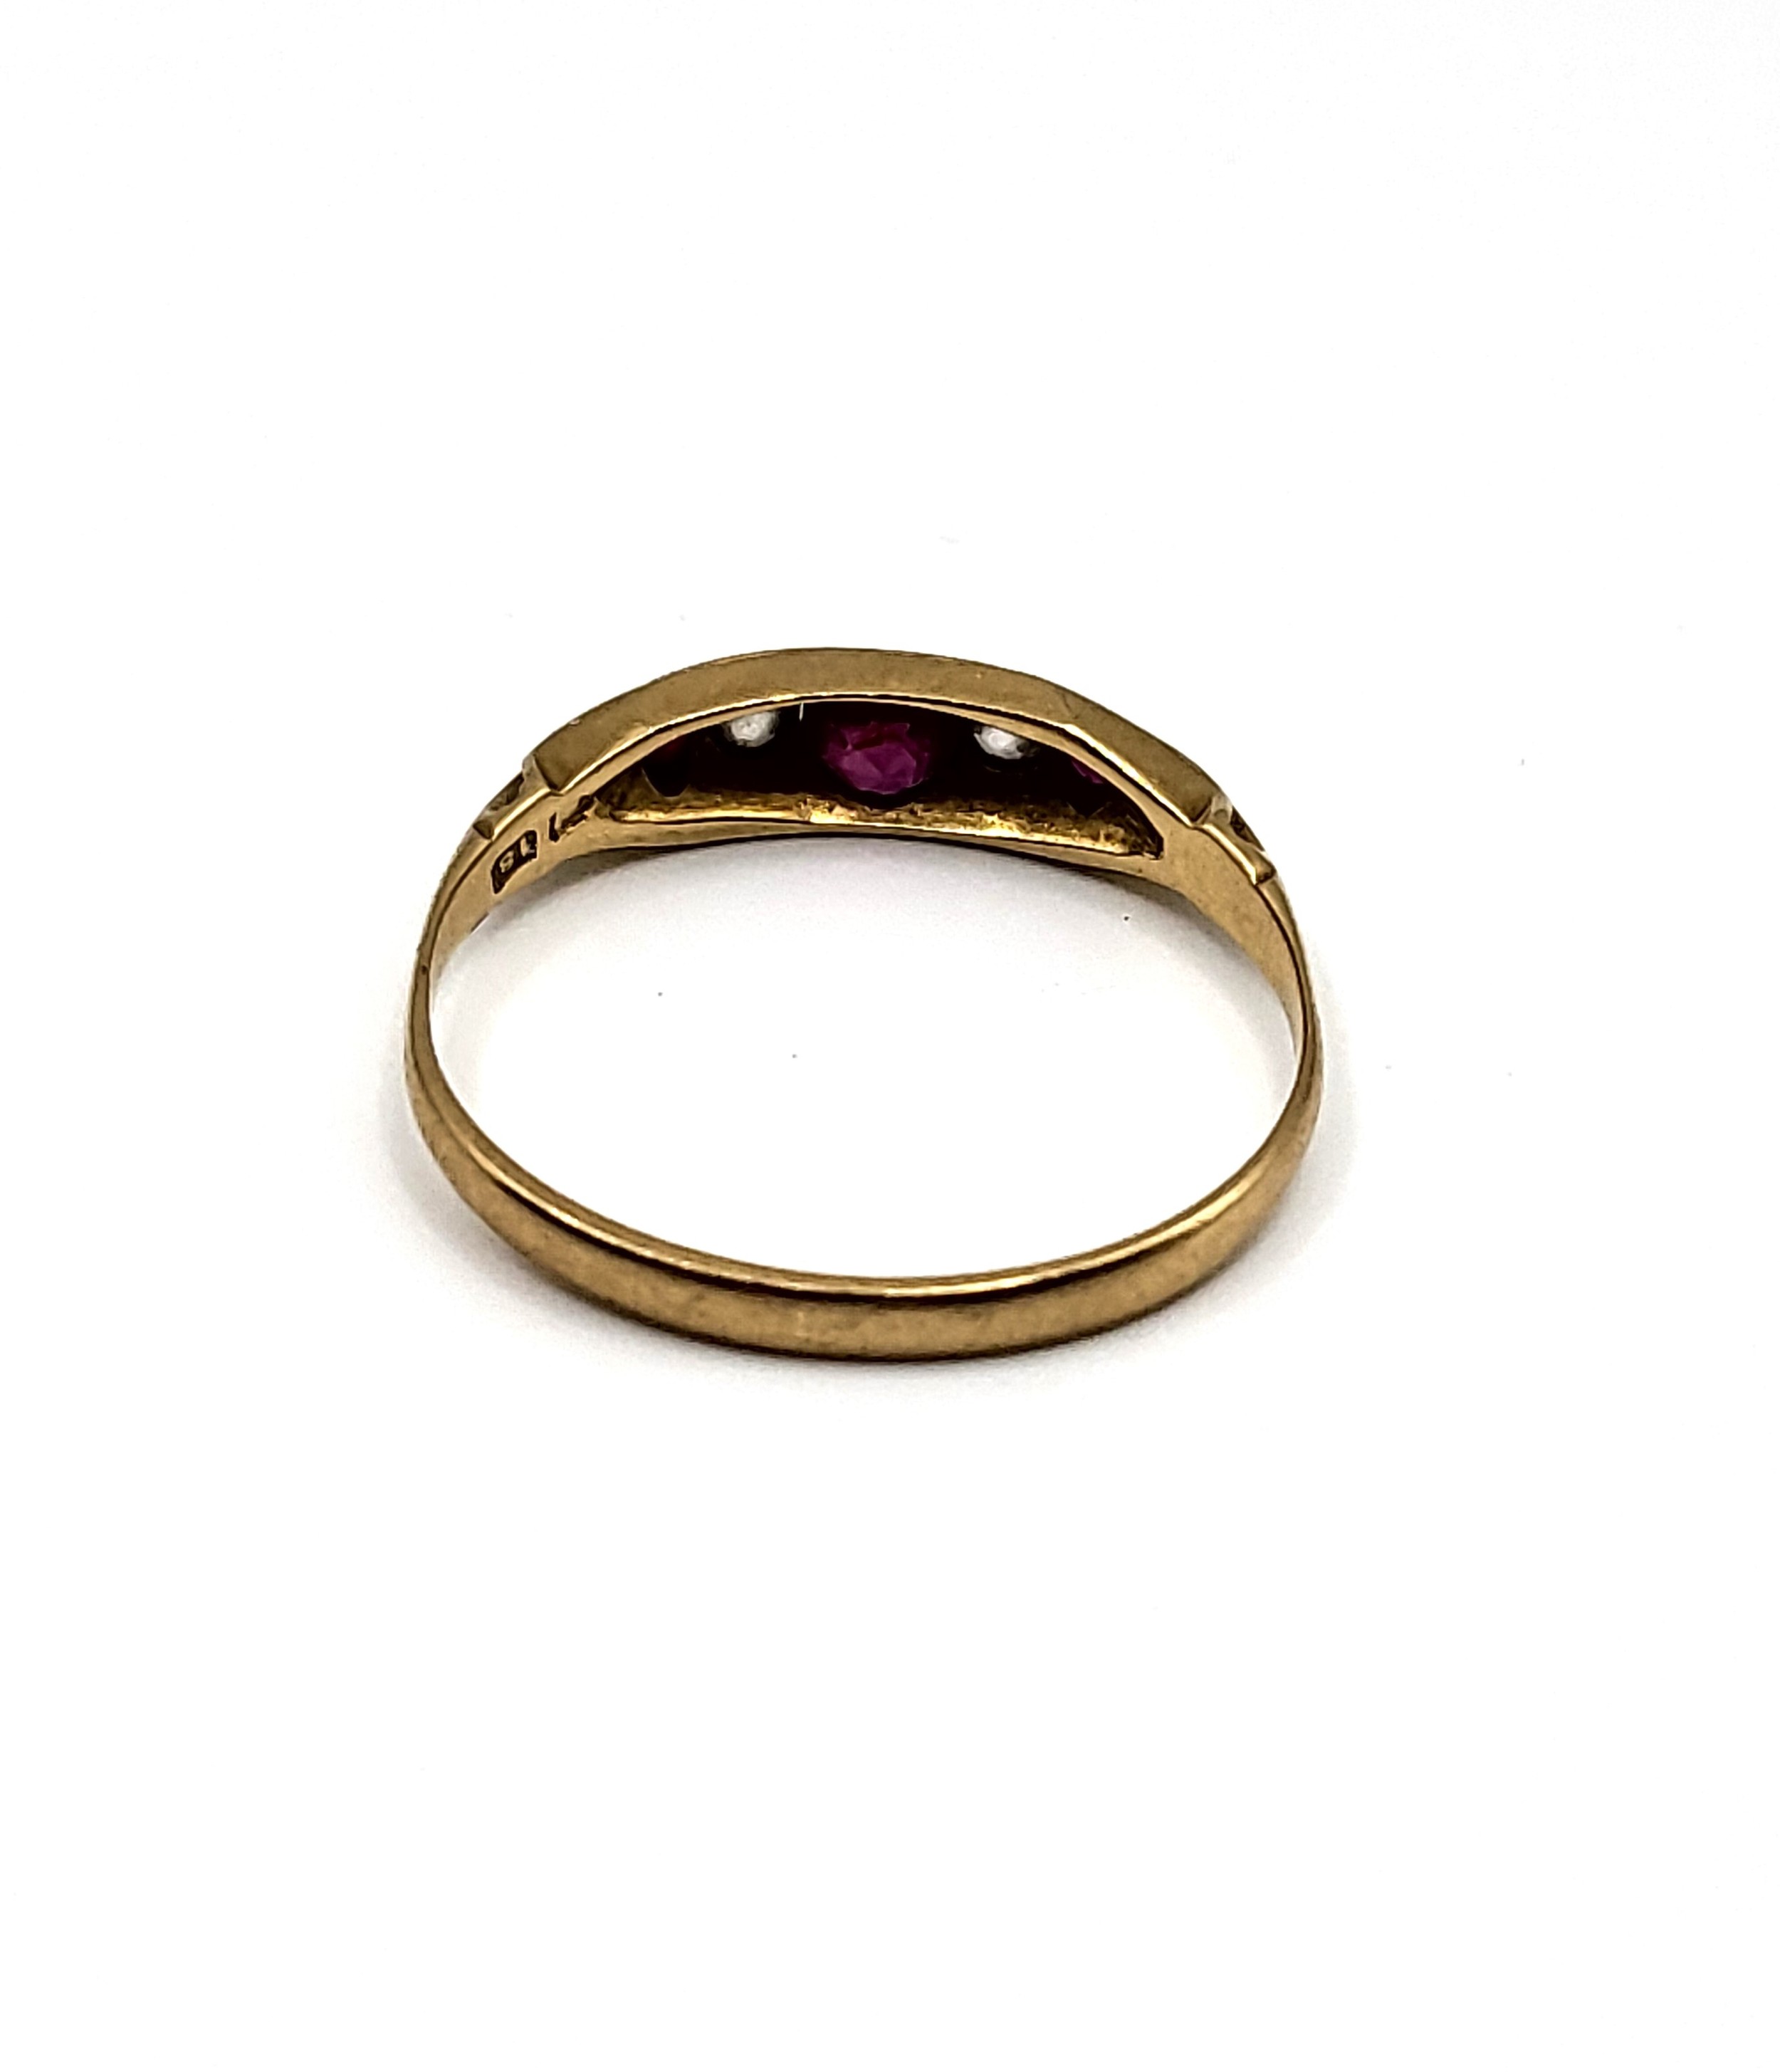 An 18ct yellow gold, diamond, and ruby ring, set with a larger round-cut ruby, two old-cut diamonds, - Image 4 of 5